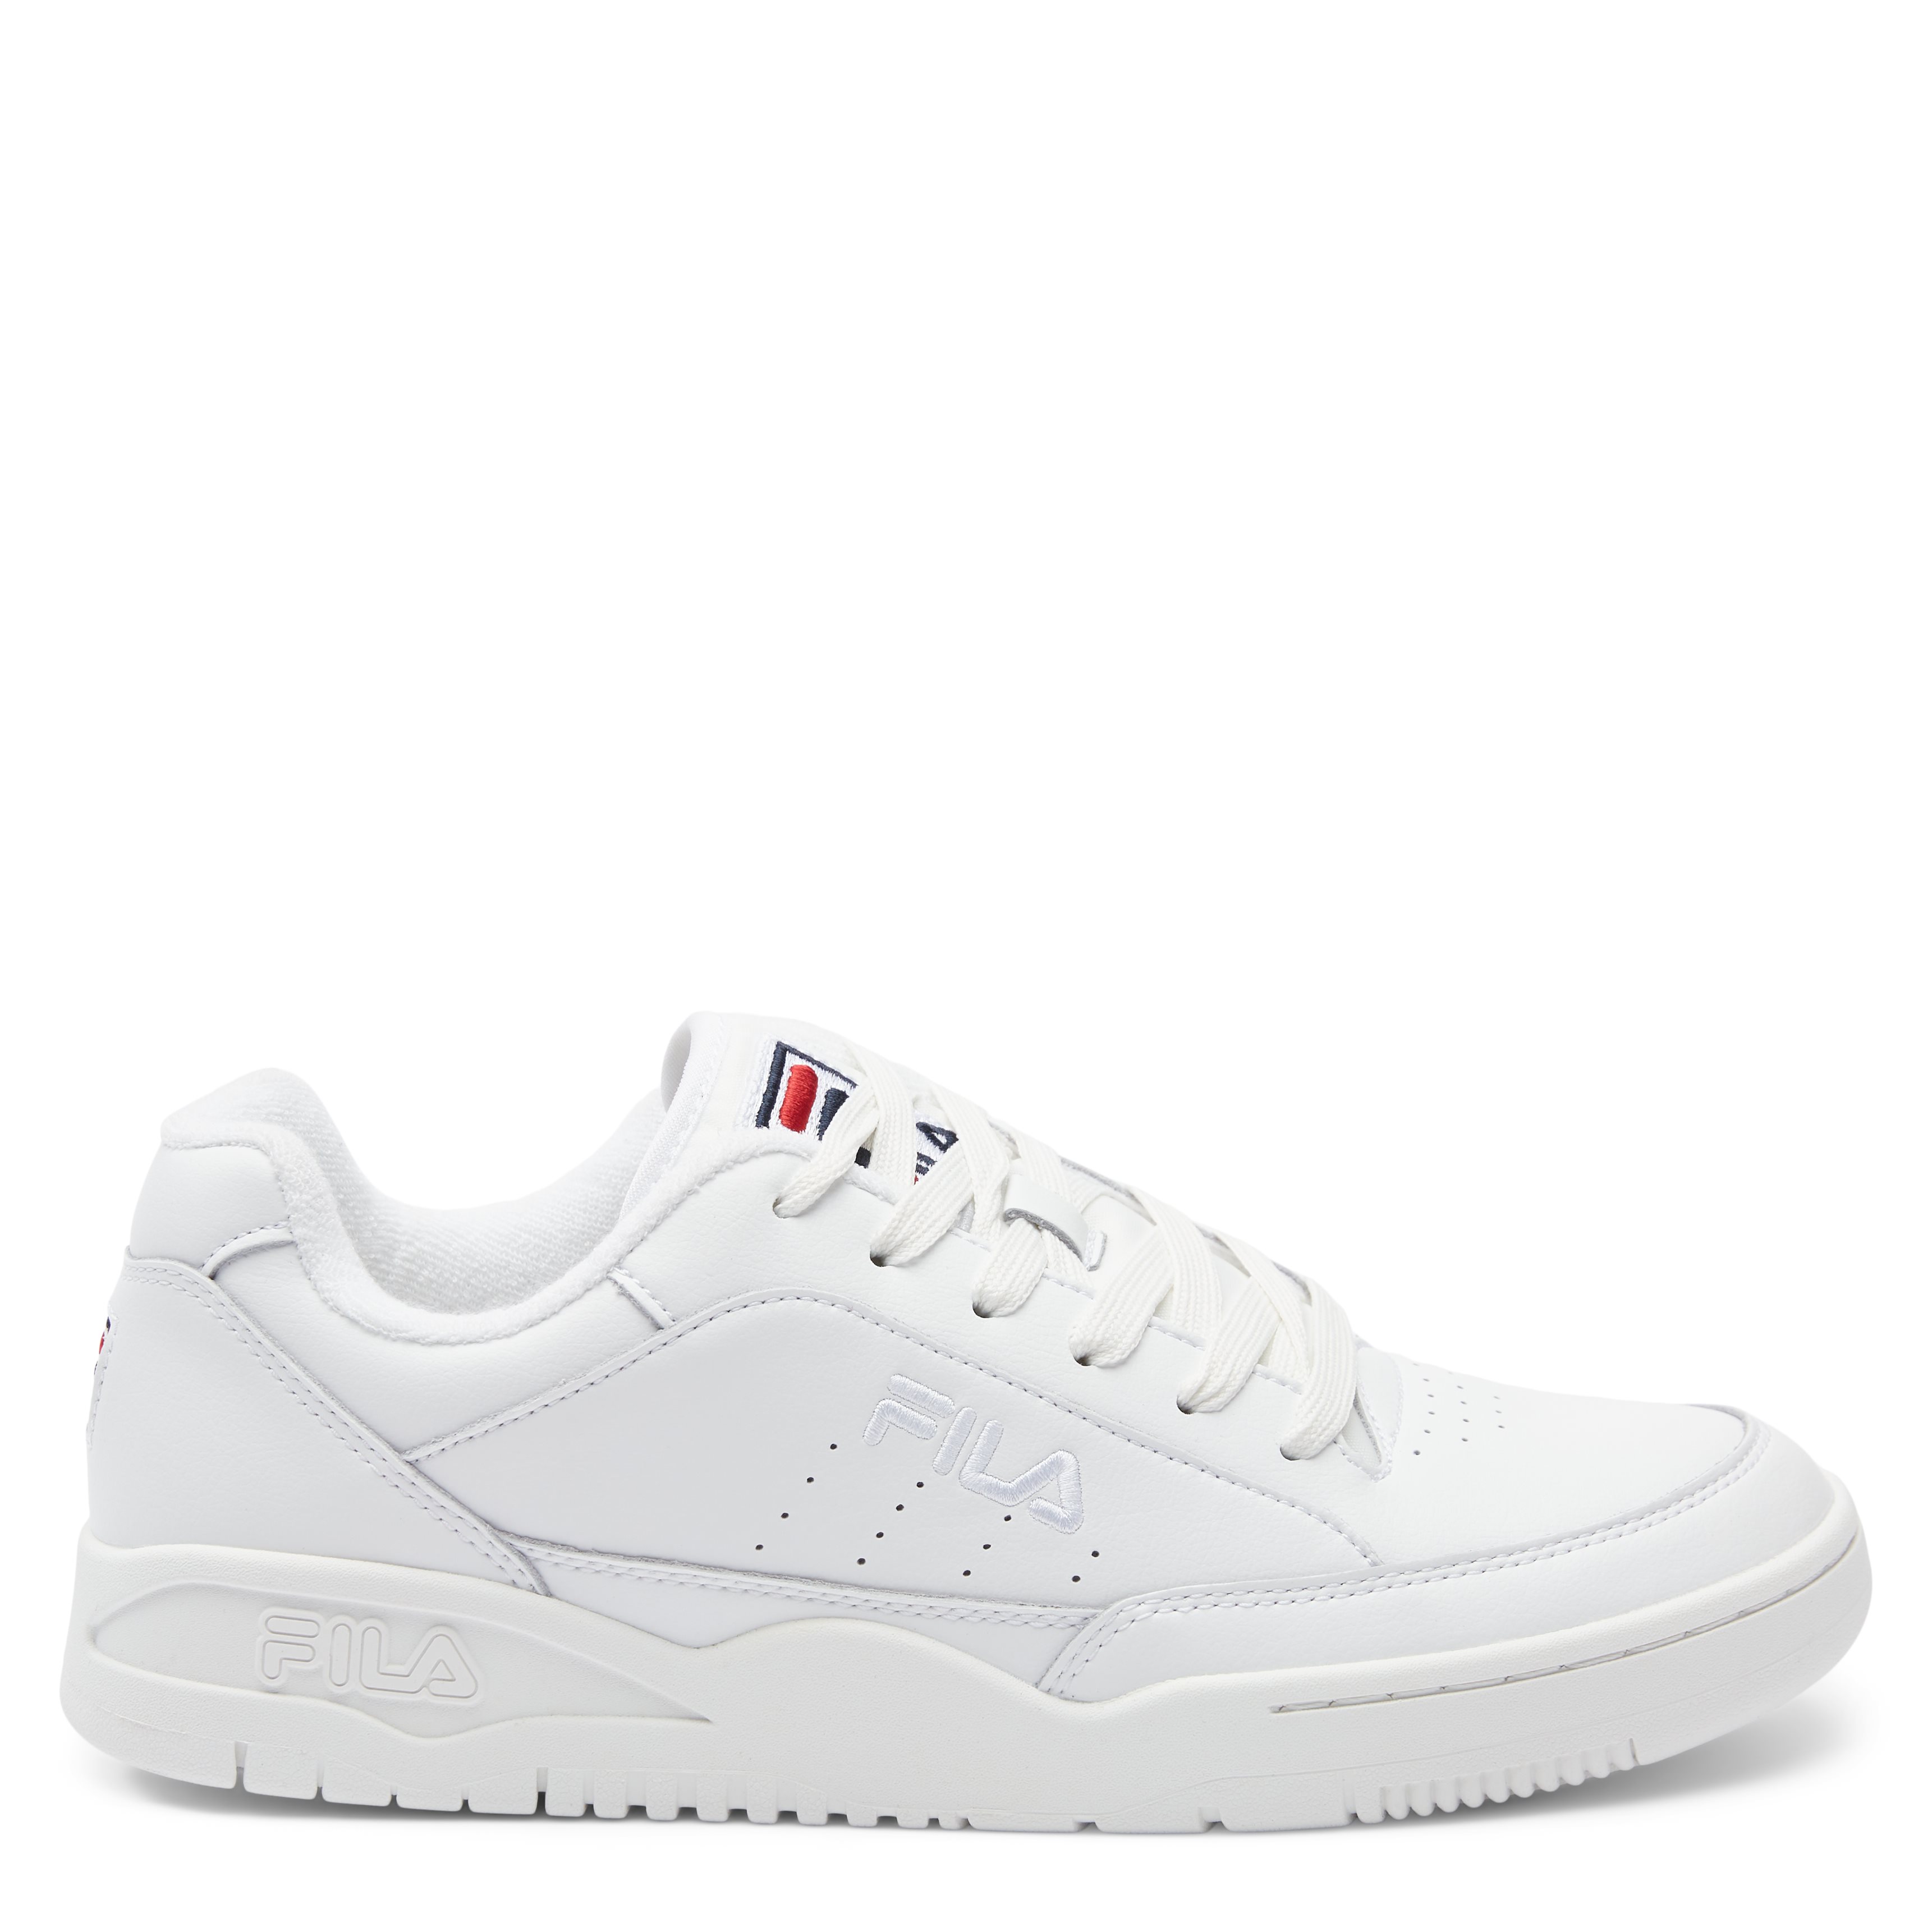 Town Classic Sneaker - Shoes - White